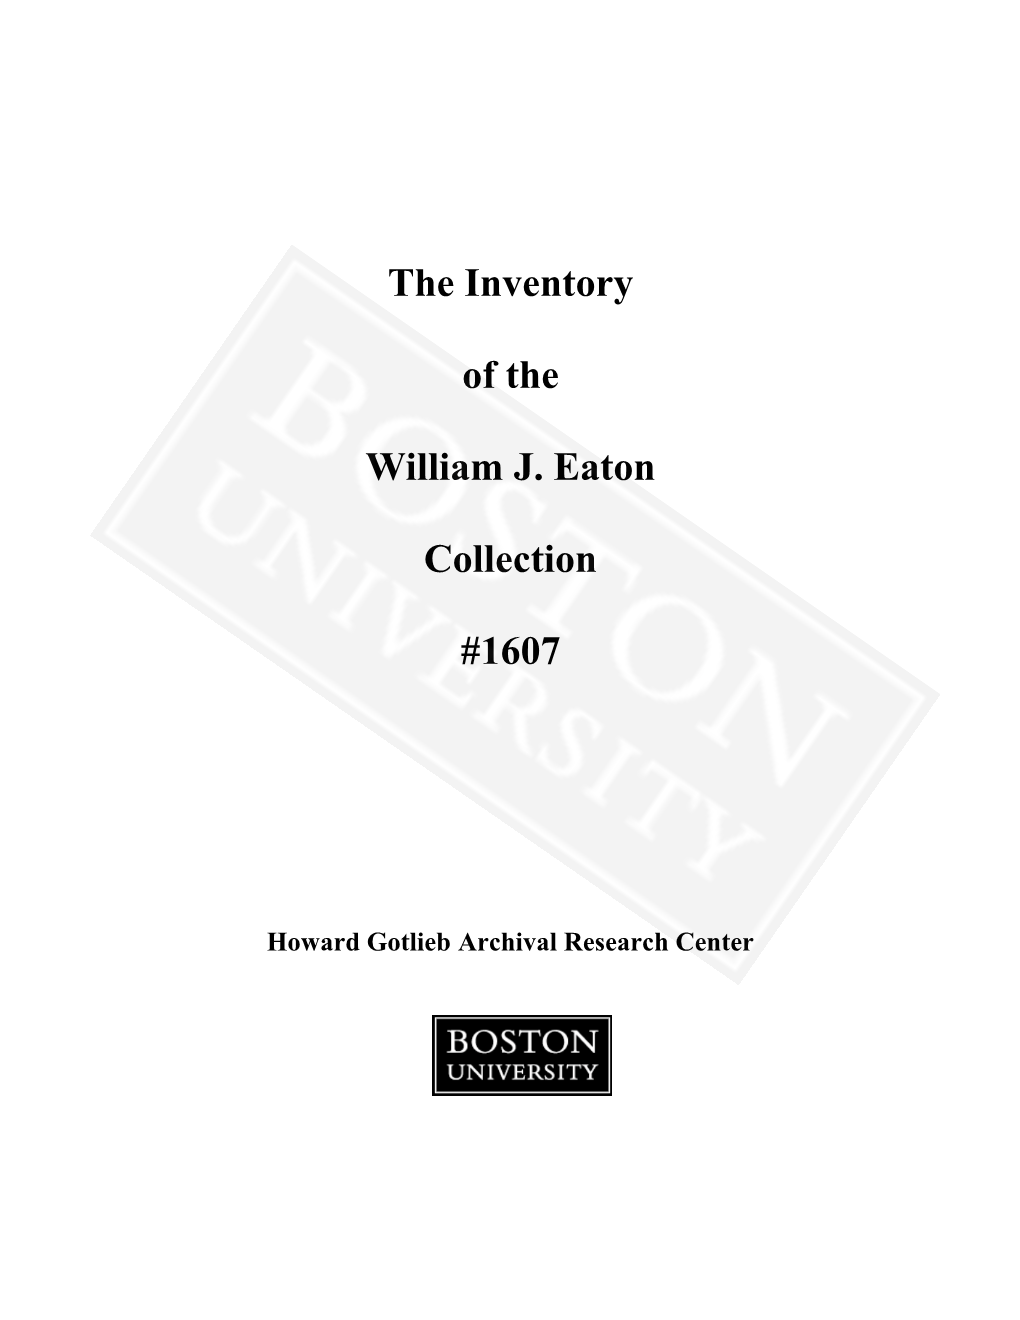 The Inventory of the William J. Eaton Collection #1607